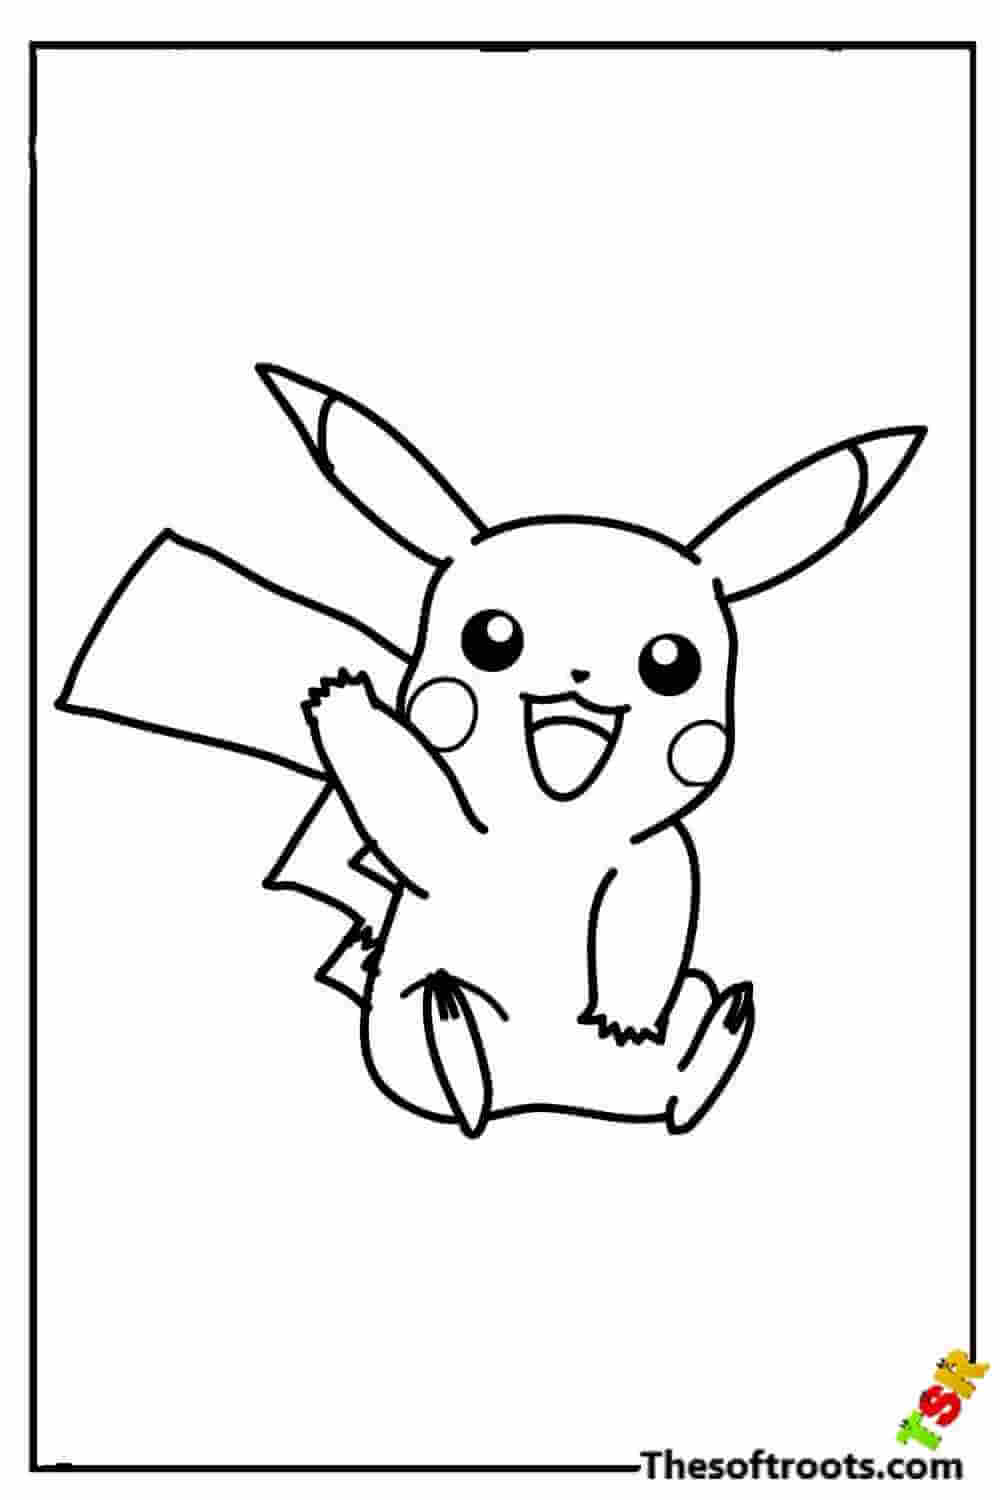 Waving Pikachu coloring pages